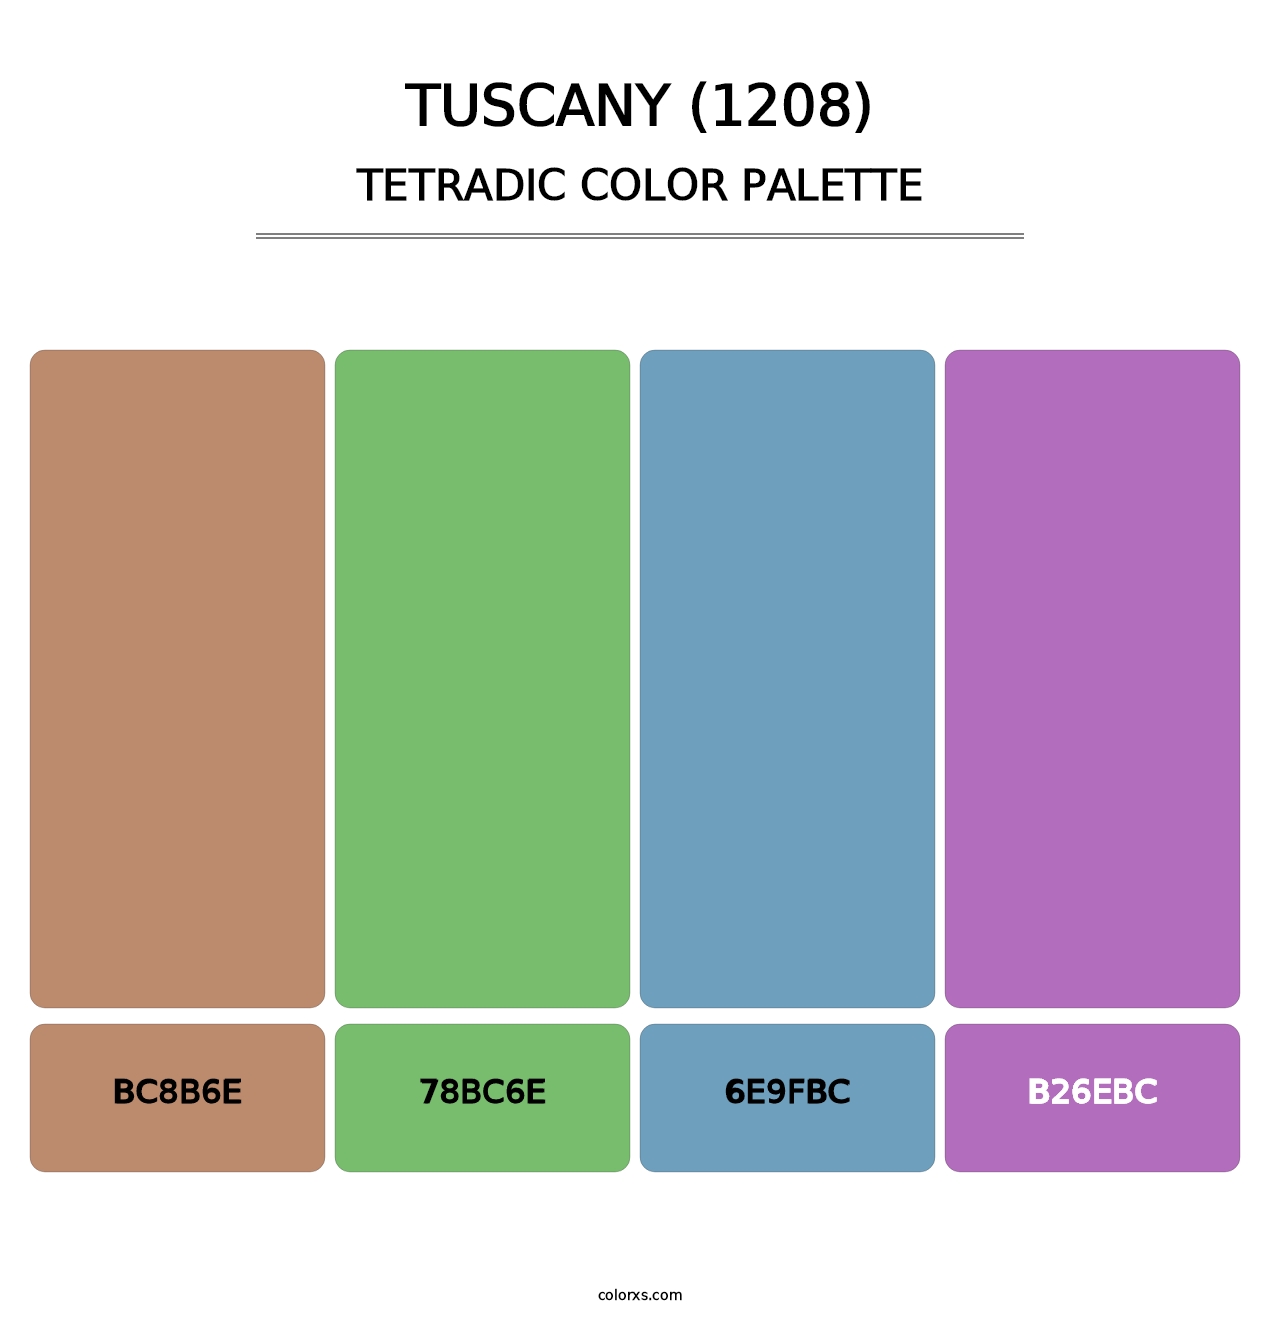 Tuscany (1208) - Tetradic Color Palette